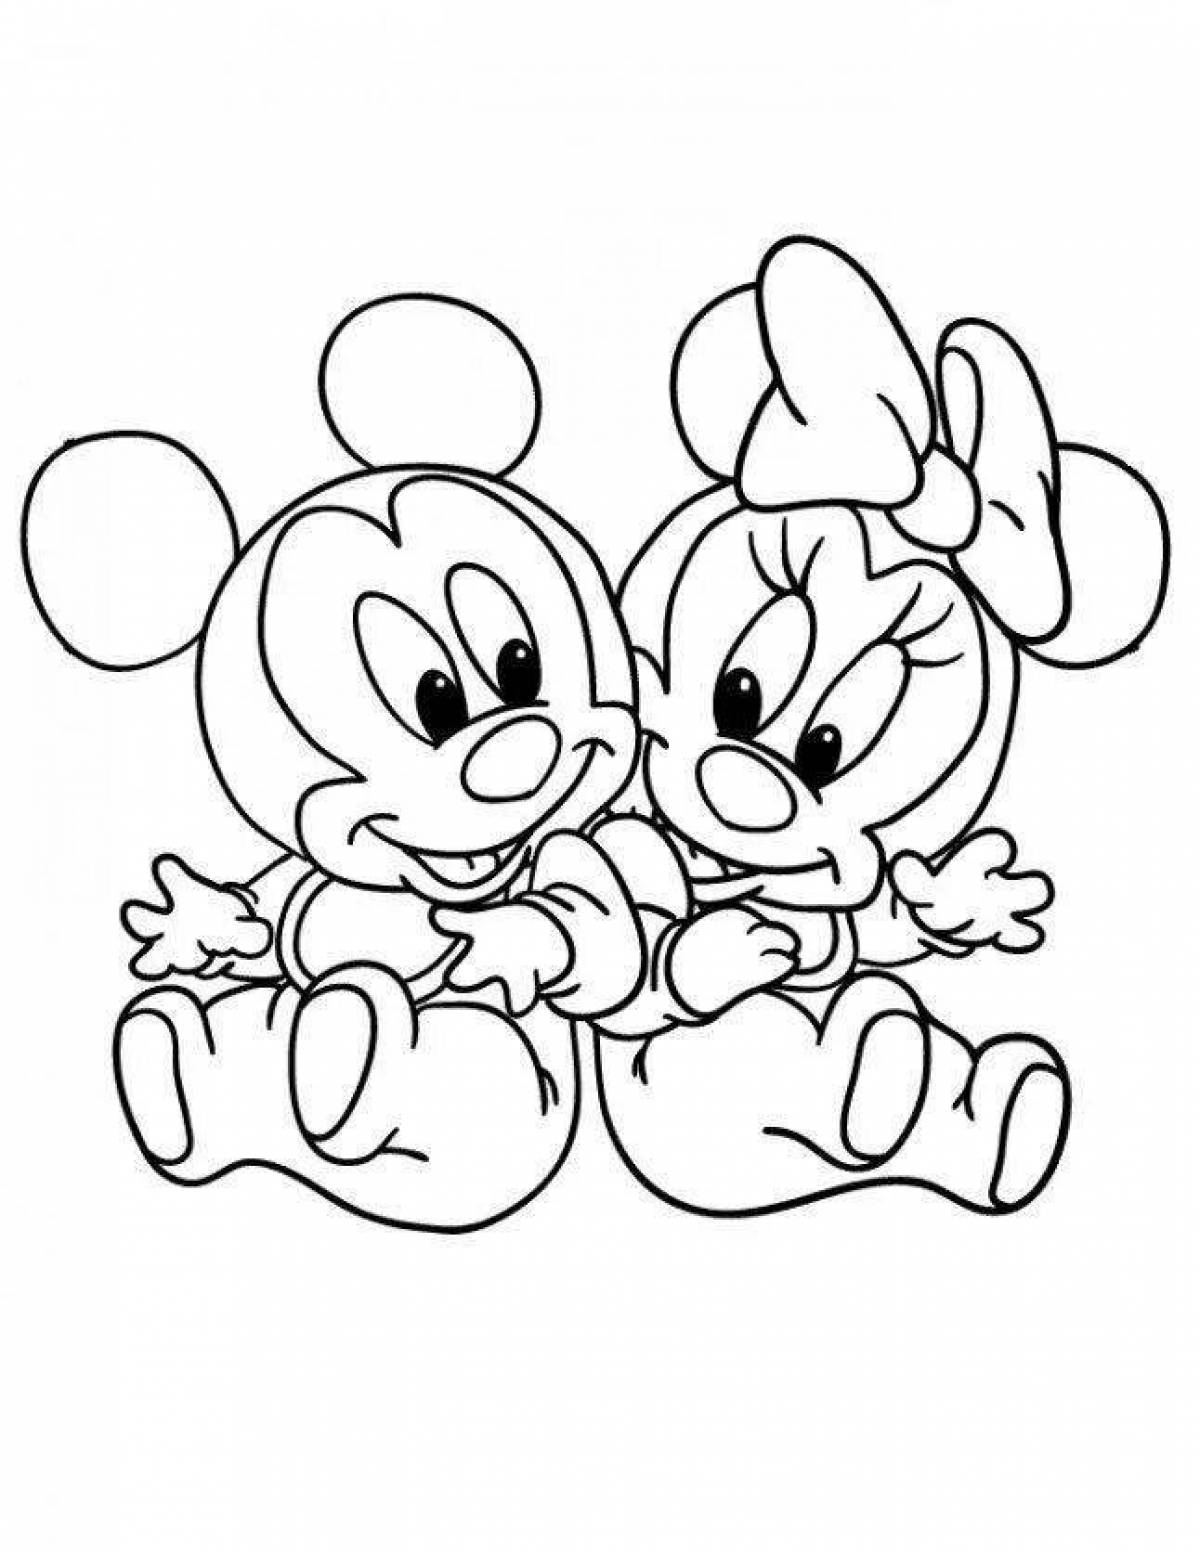 Delightful coloring of mickey mouse and minnie mouse